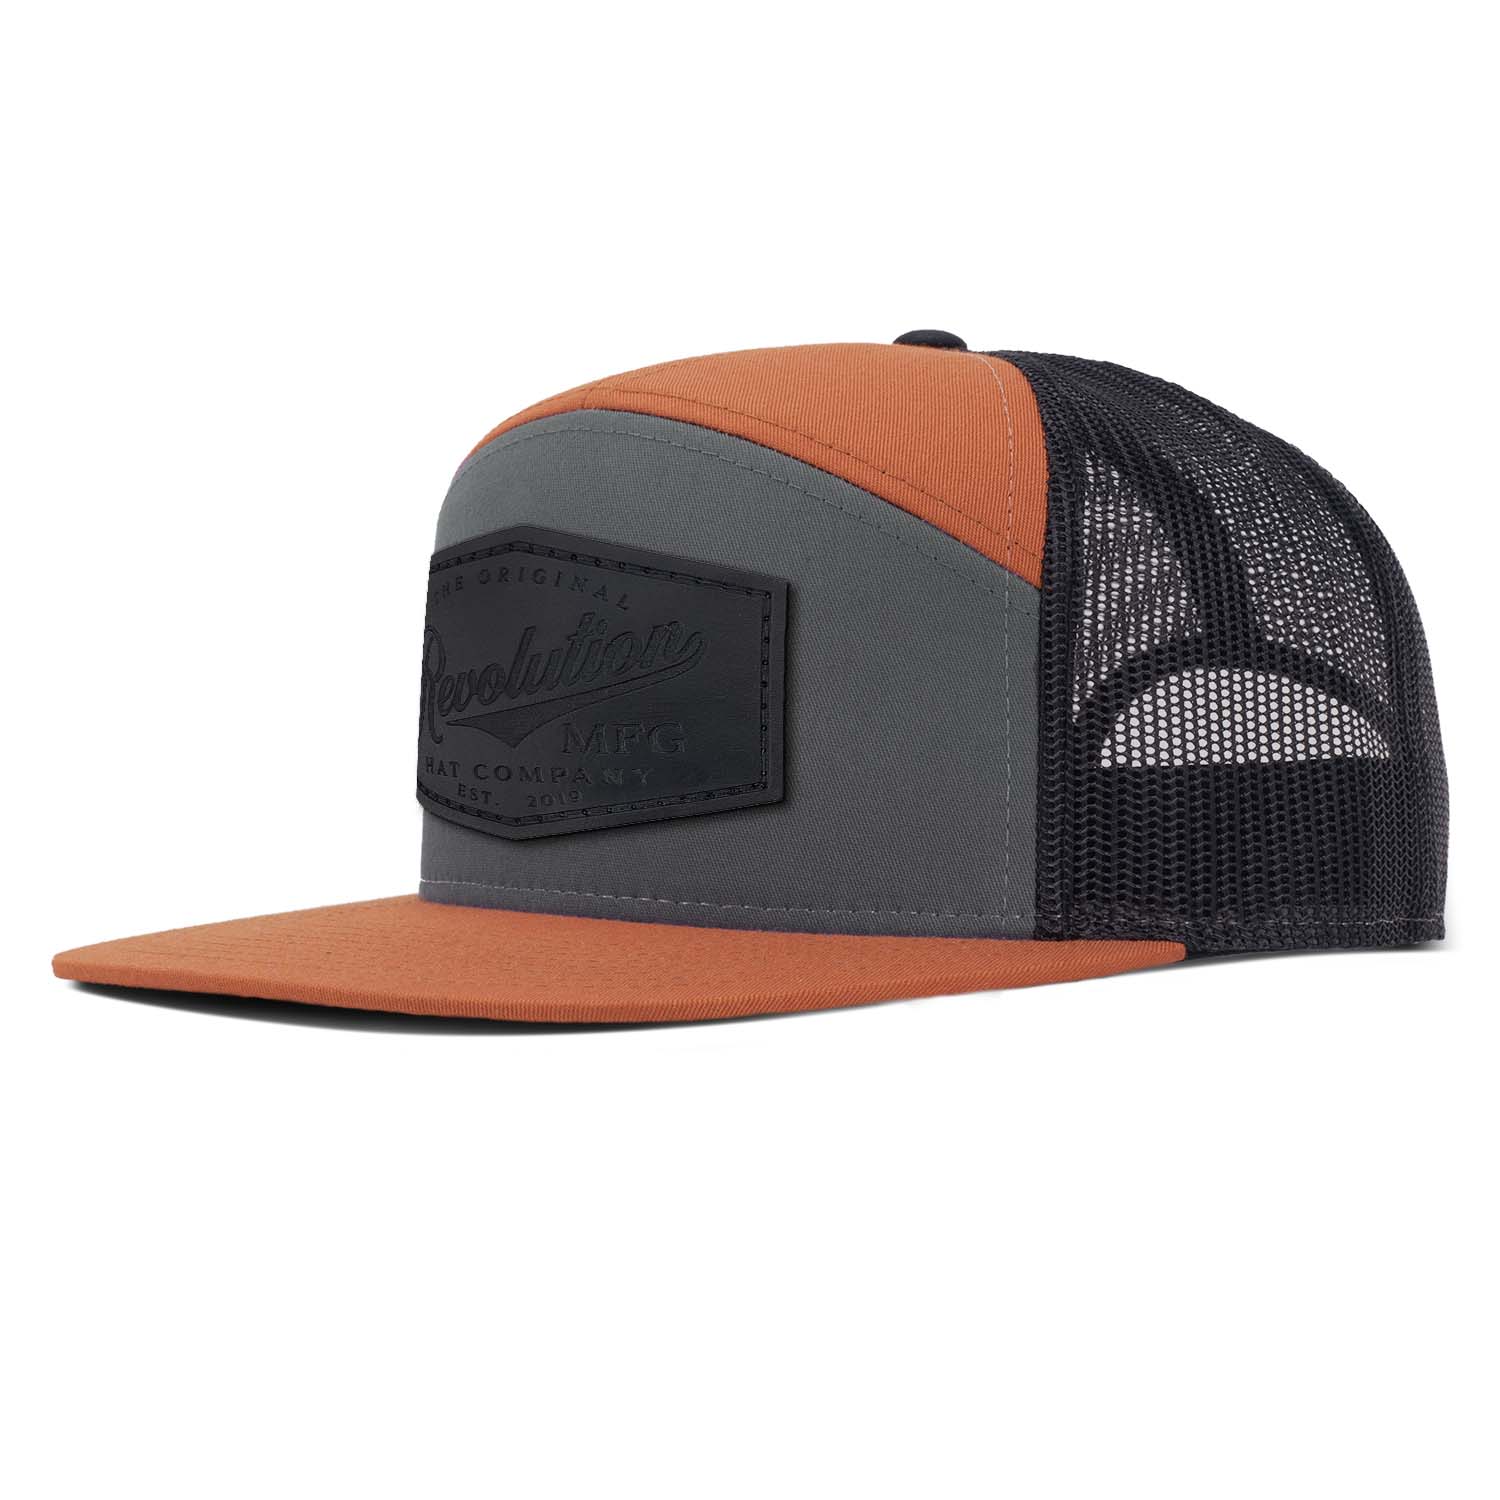 Revolution Mfg charcoal and burnt orange with black mesh 7 panel trucker featuring our full grain black leather Revolution Hat Co patch on the seamless front panel.